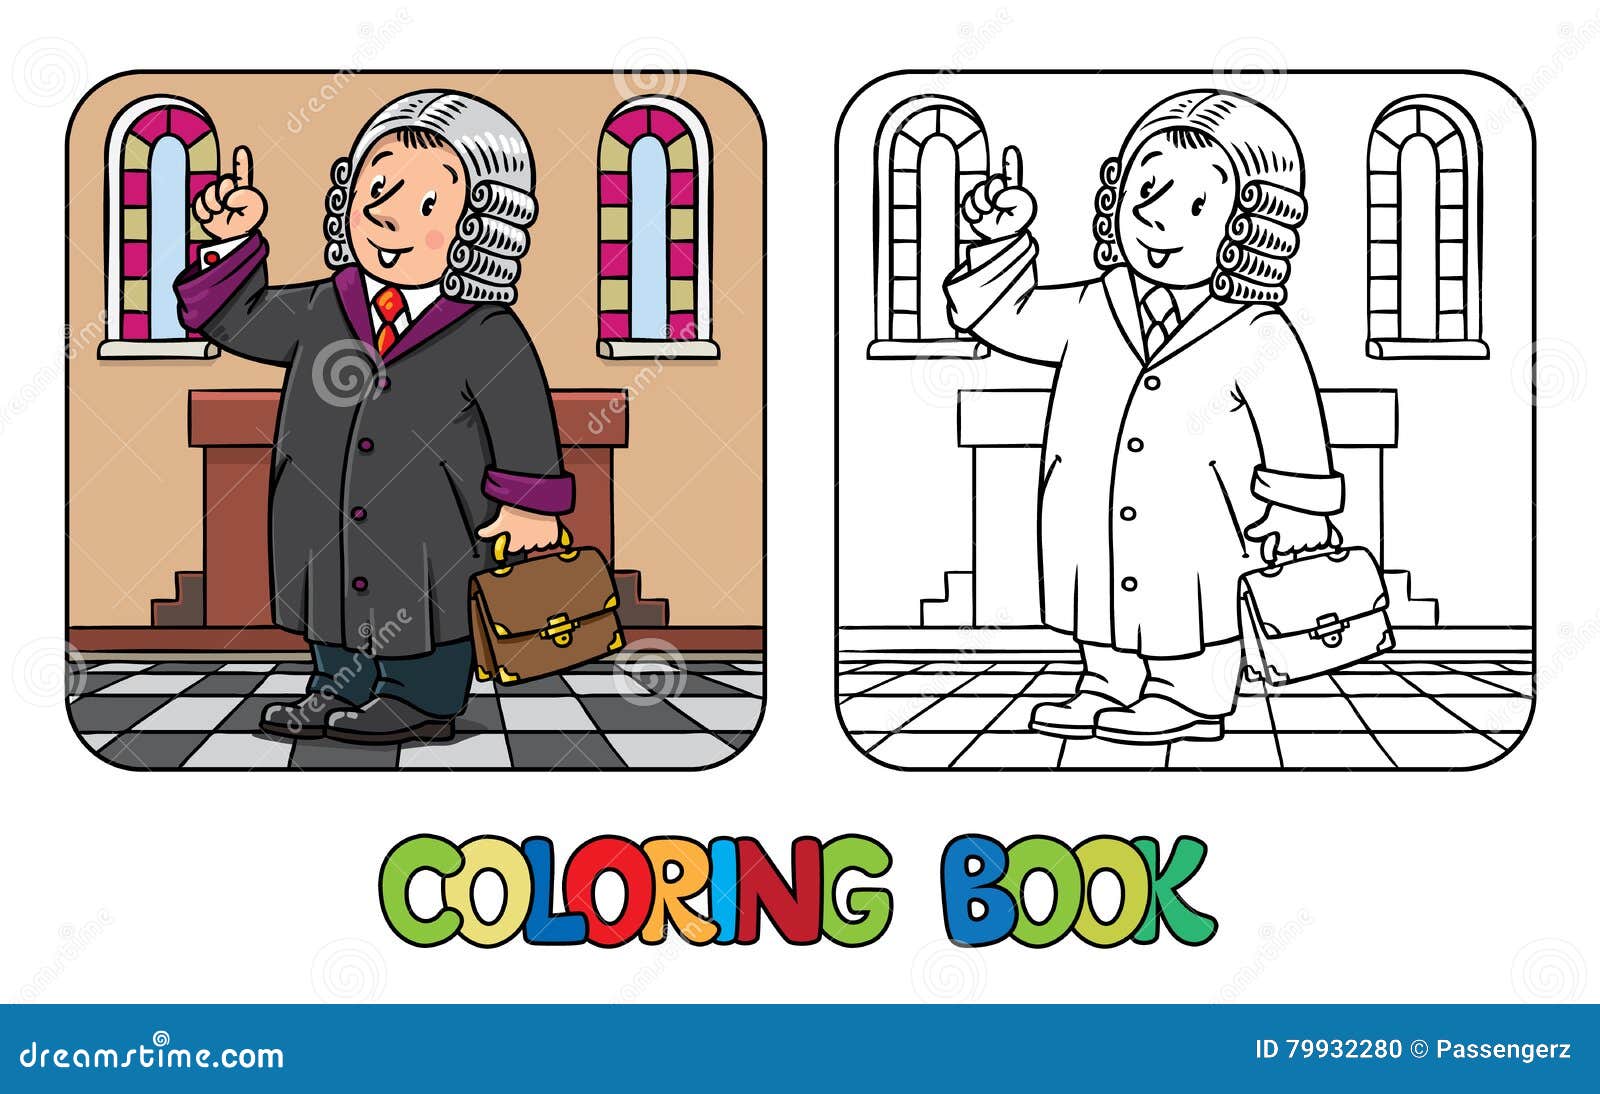 Coloring Book of Funny Judge Stock Vector - Illustration of employment